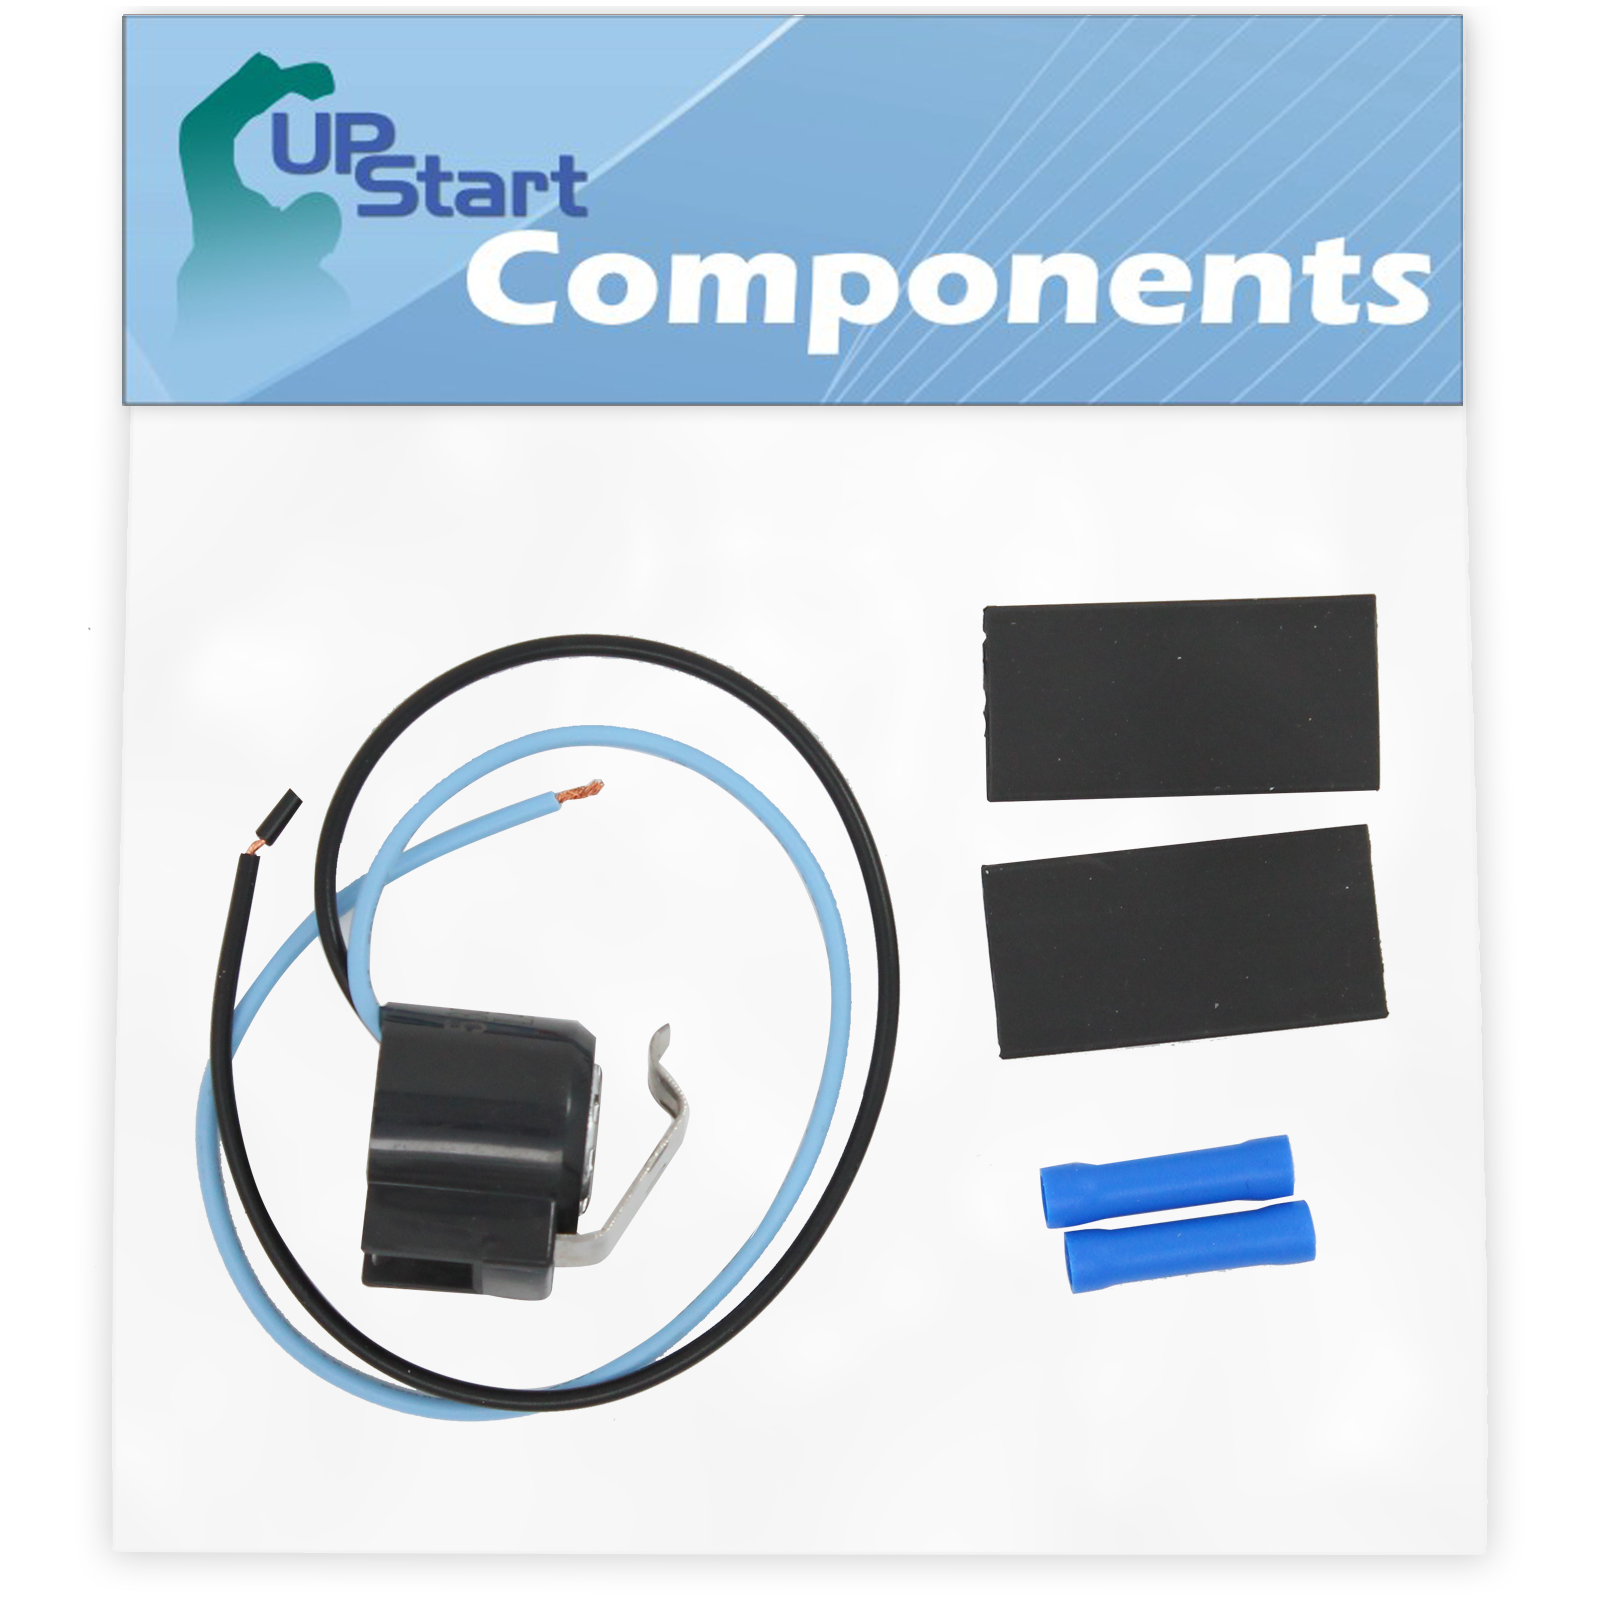 5303918214 Defrost Thermostat Replacement for Frigidaire PLHS67EGSB4 Refrigerator - Compatible with 5303918214 Defrost Thermostat Kit - UpStart Components Brand - image 1 of 2